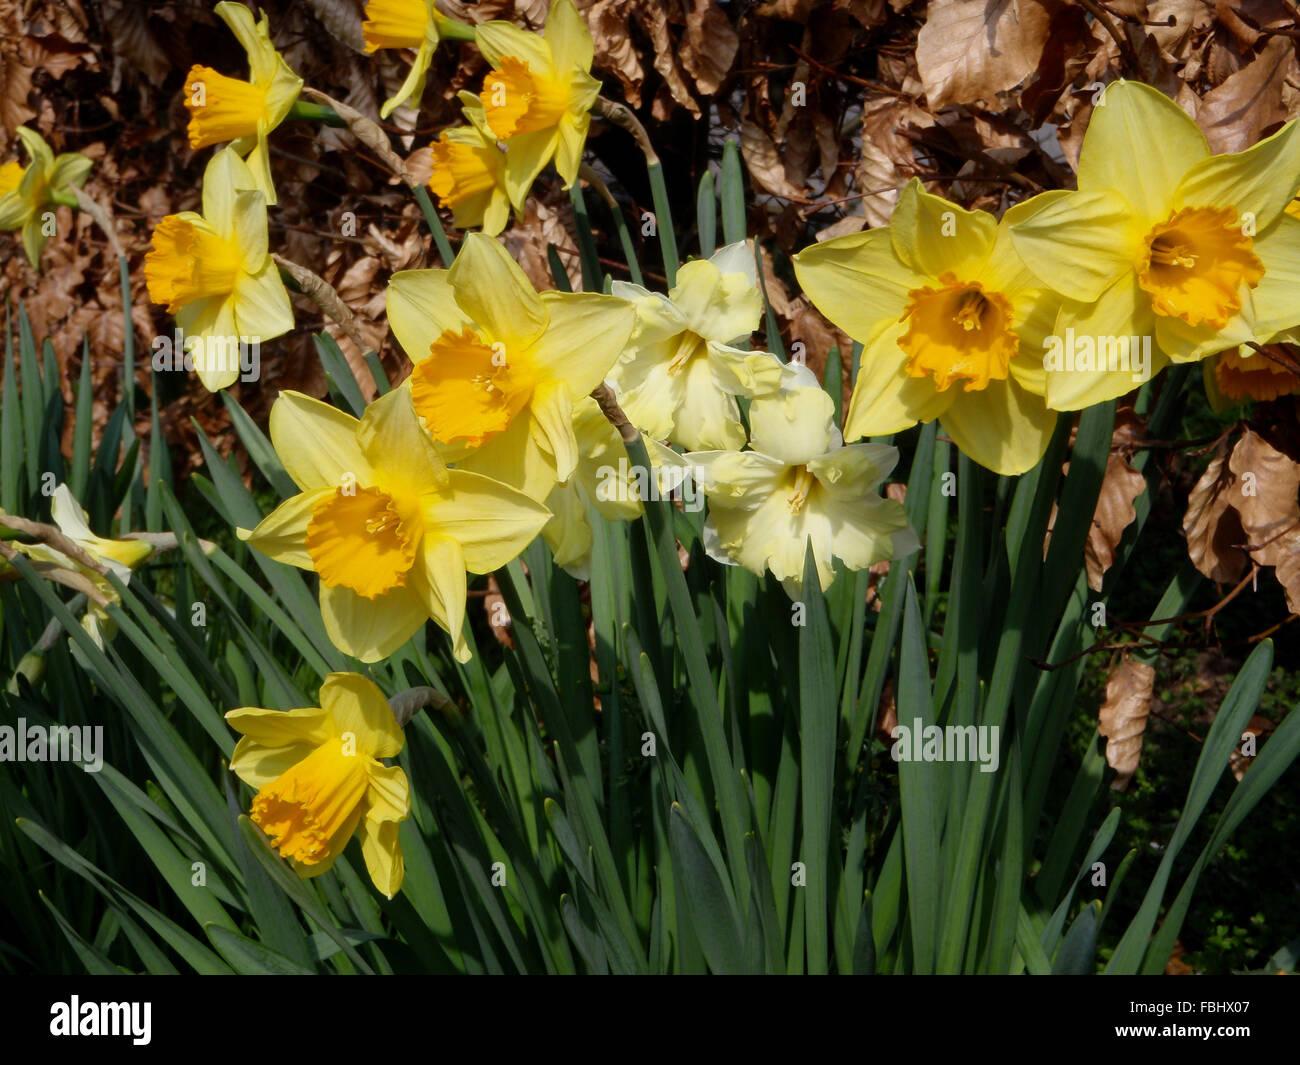 Various daffodils (Narcissus sp.) in front of a beech hedge (Fagus sylvatica) with brown leaves Stock Photo